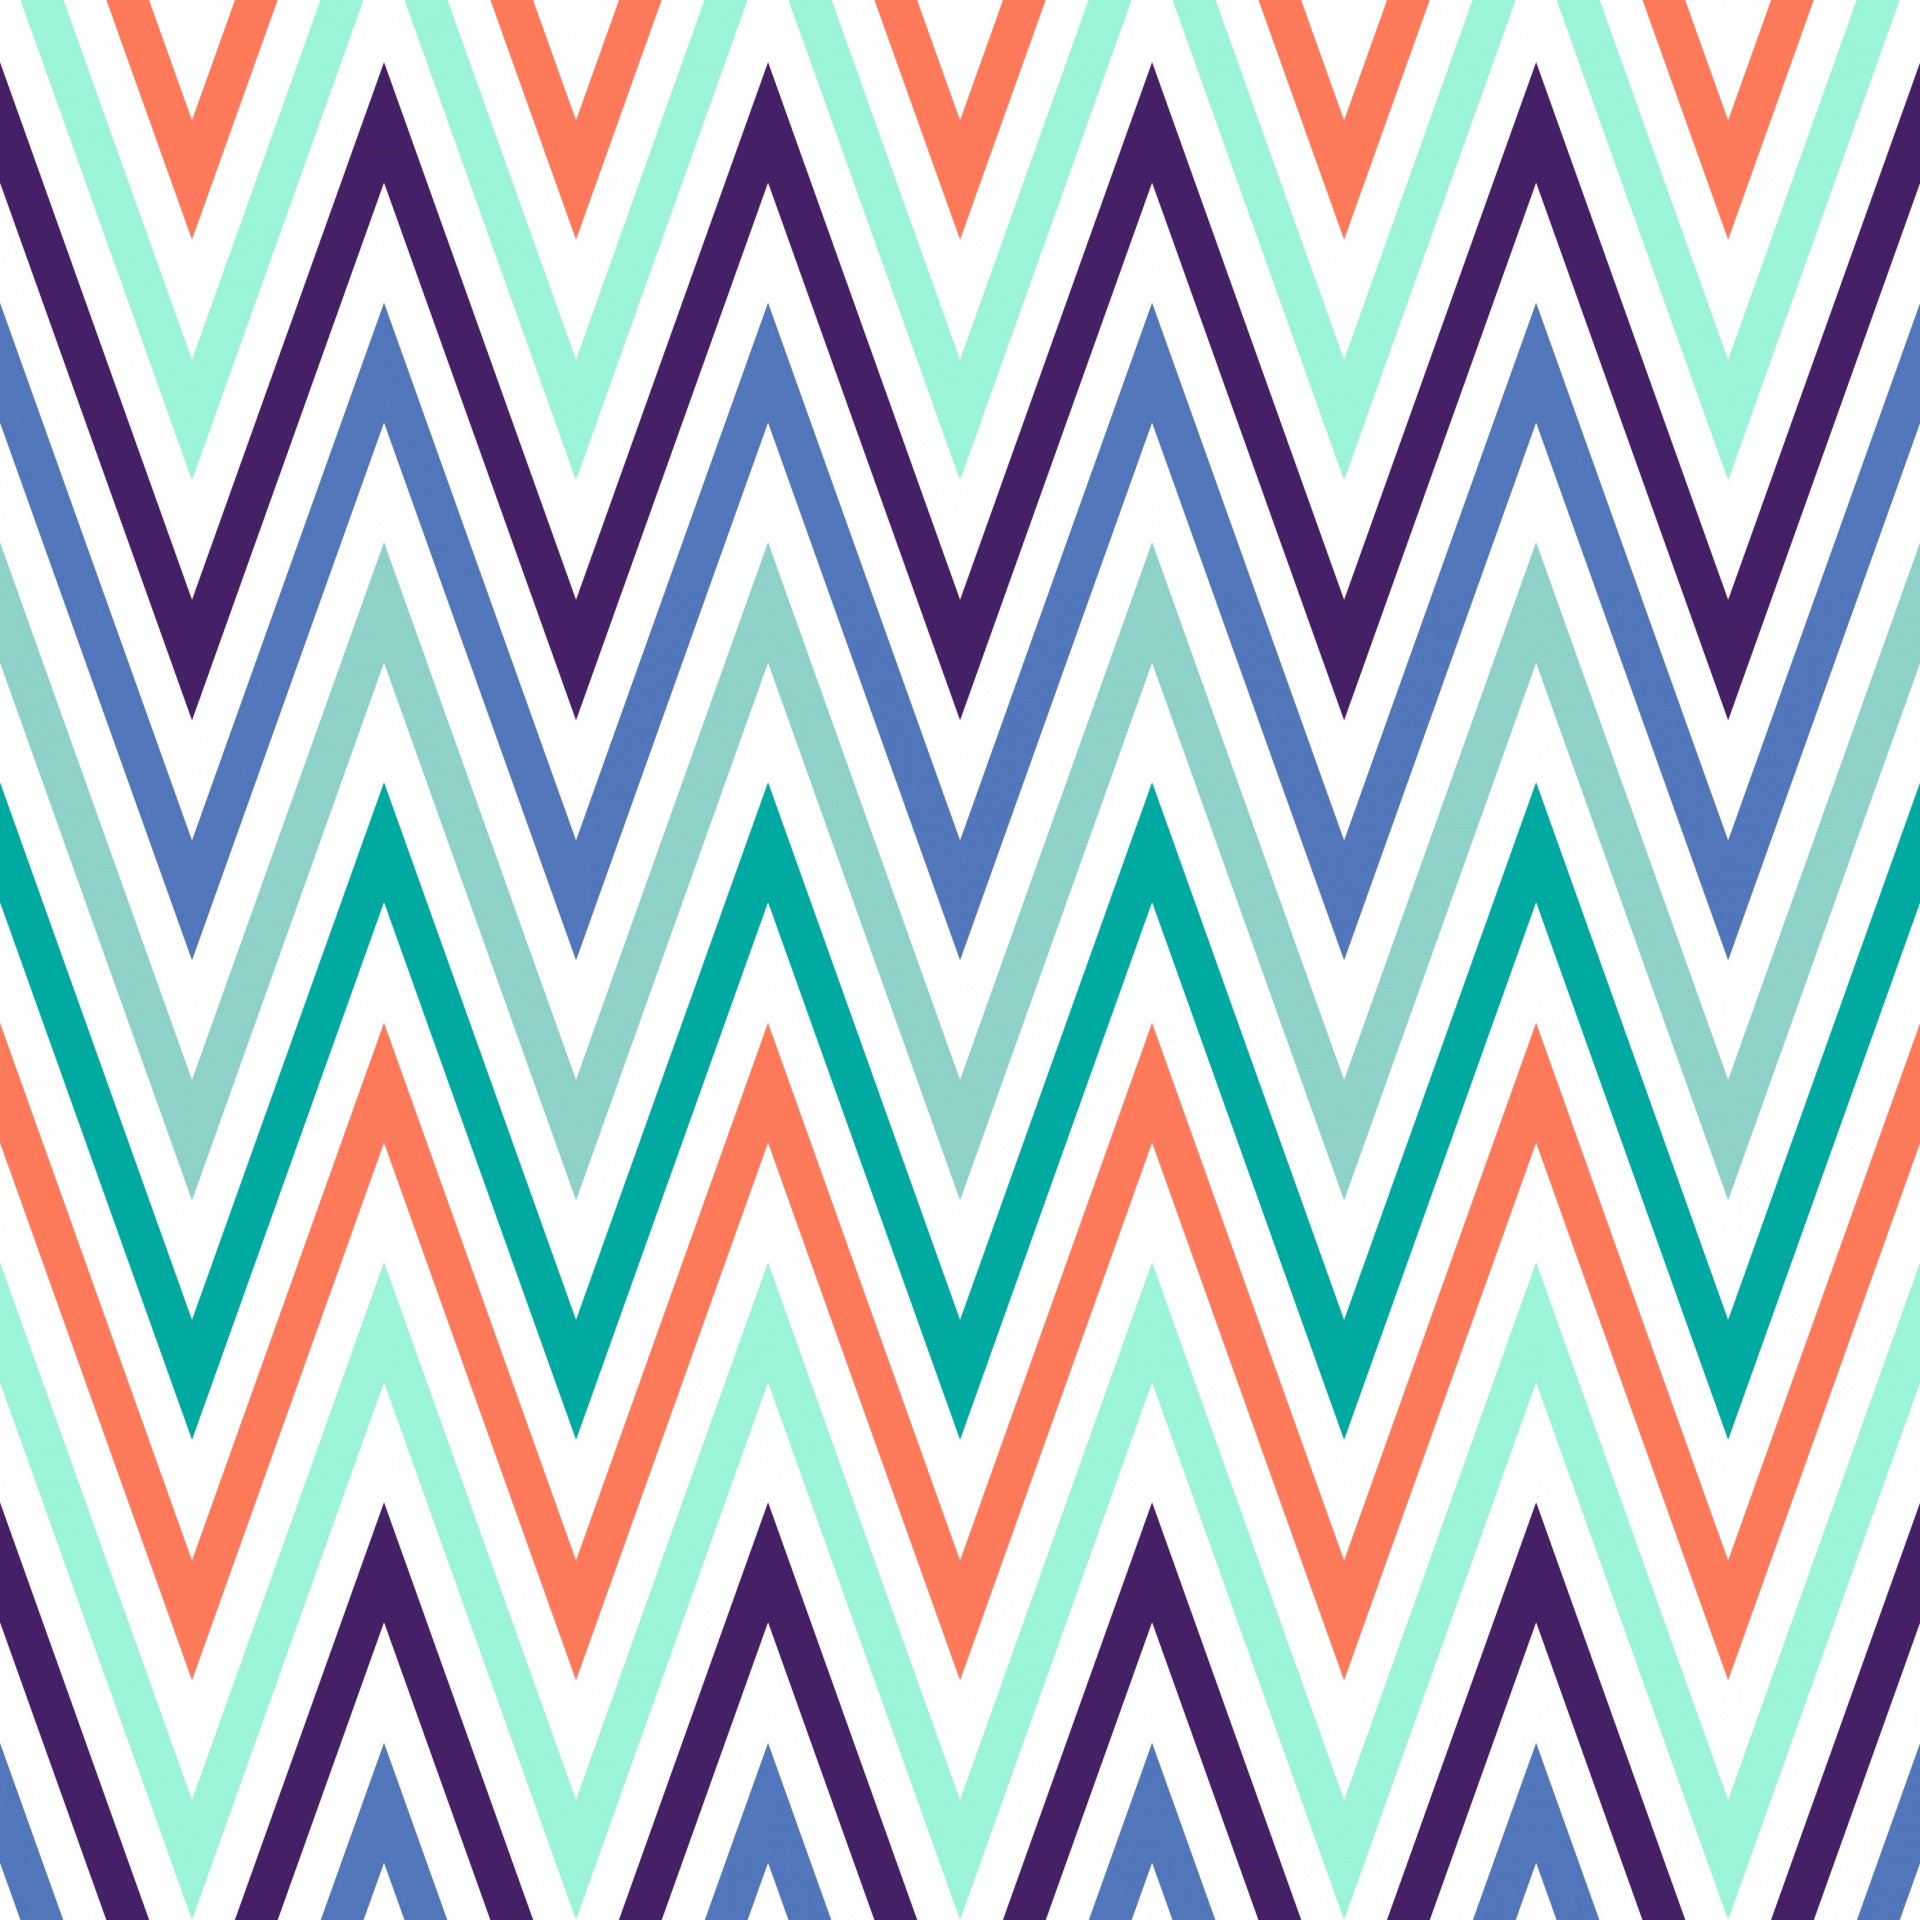 Chevrons Colourful Background